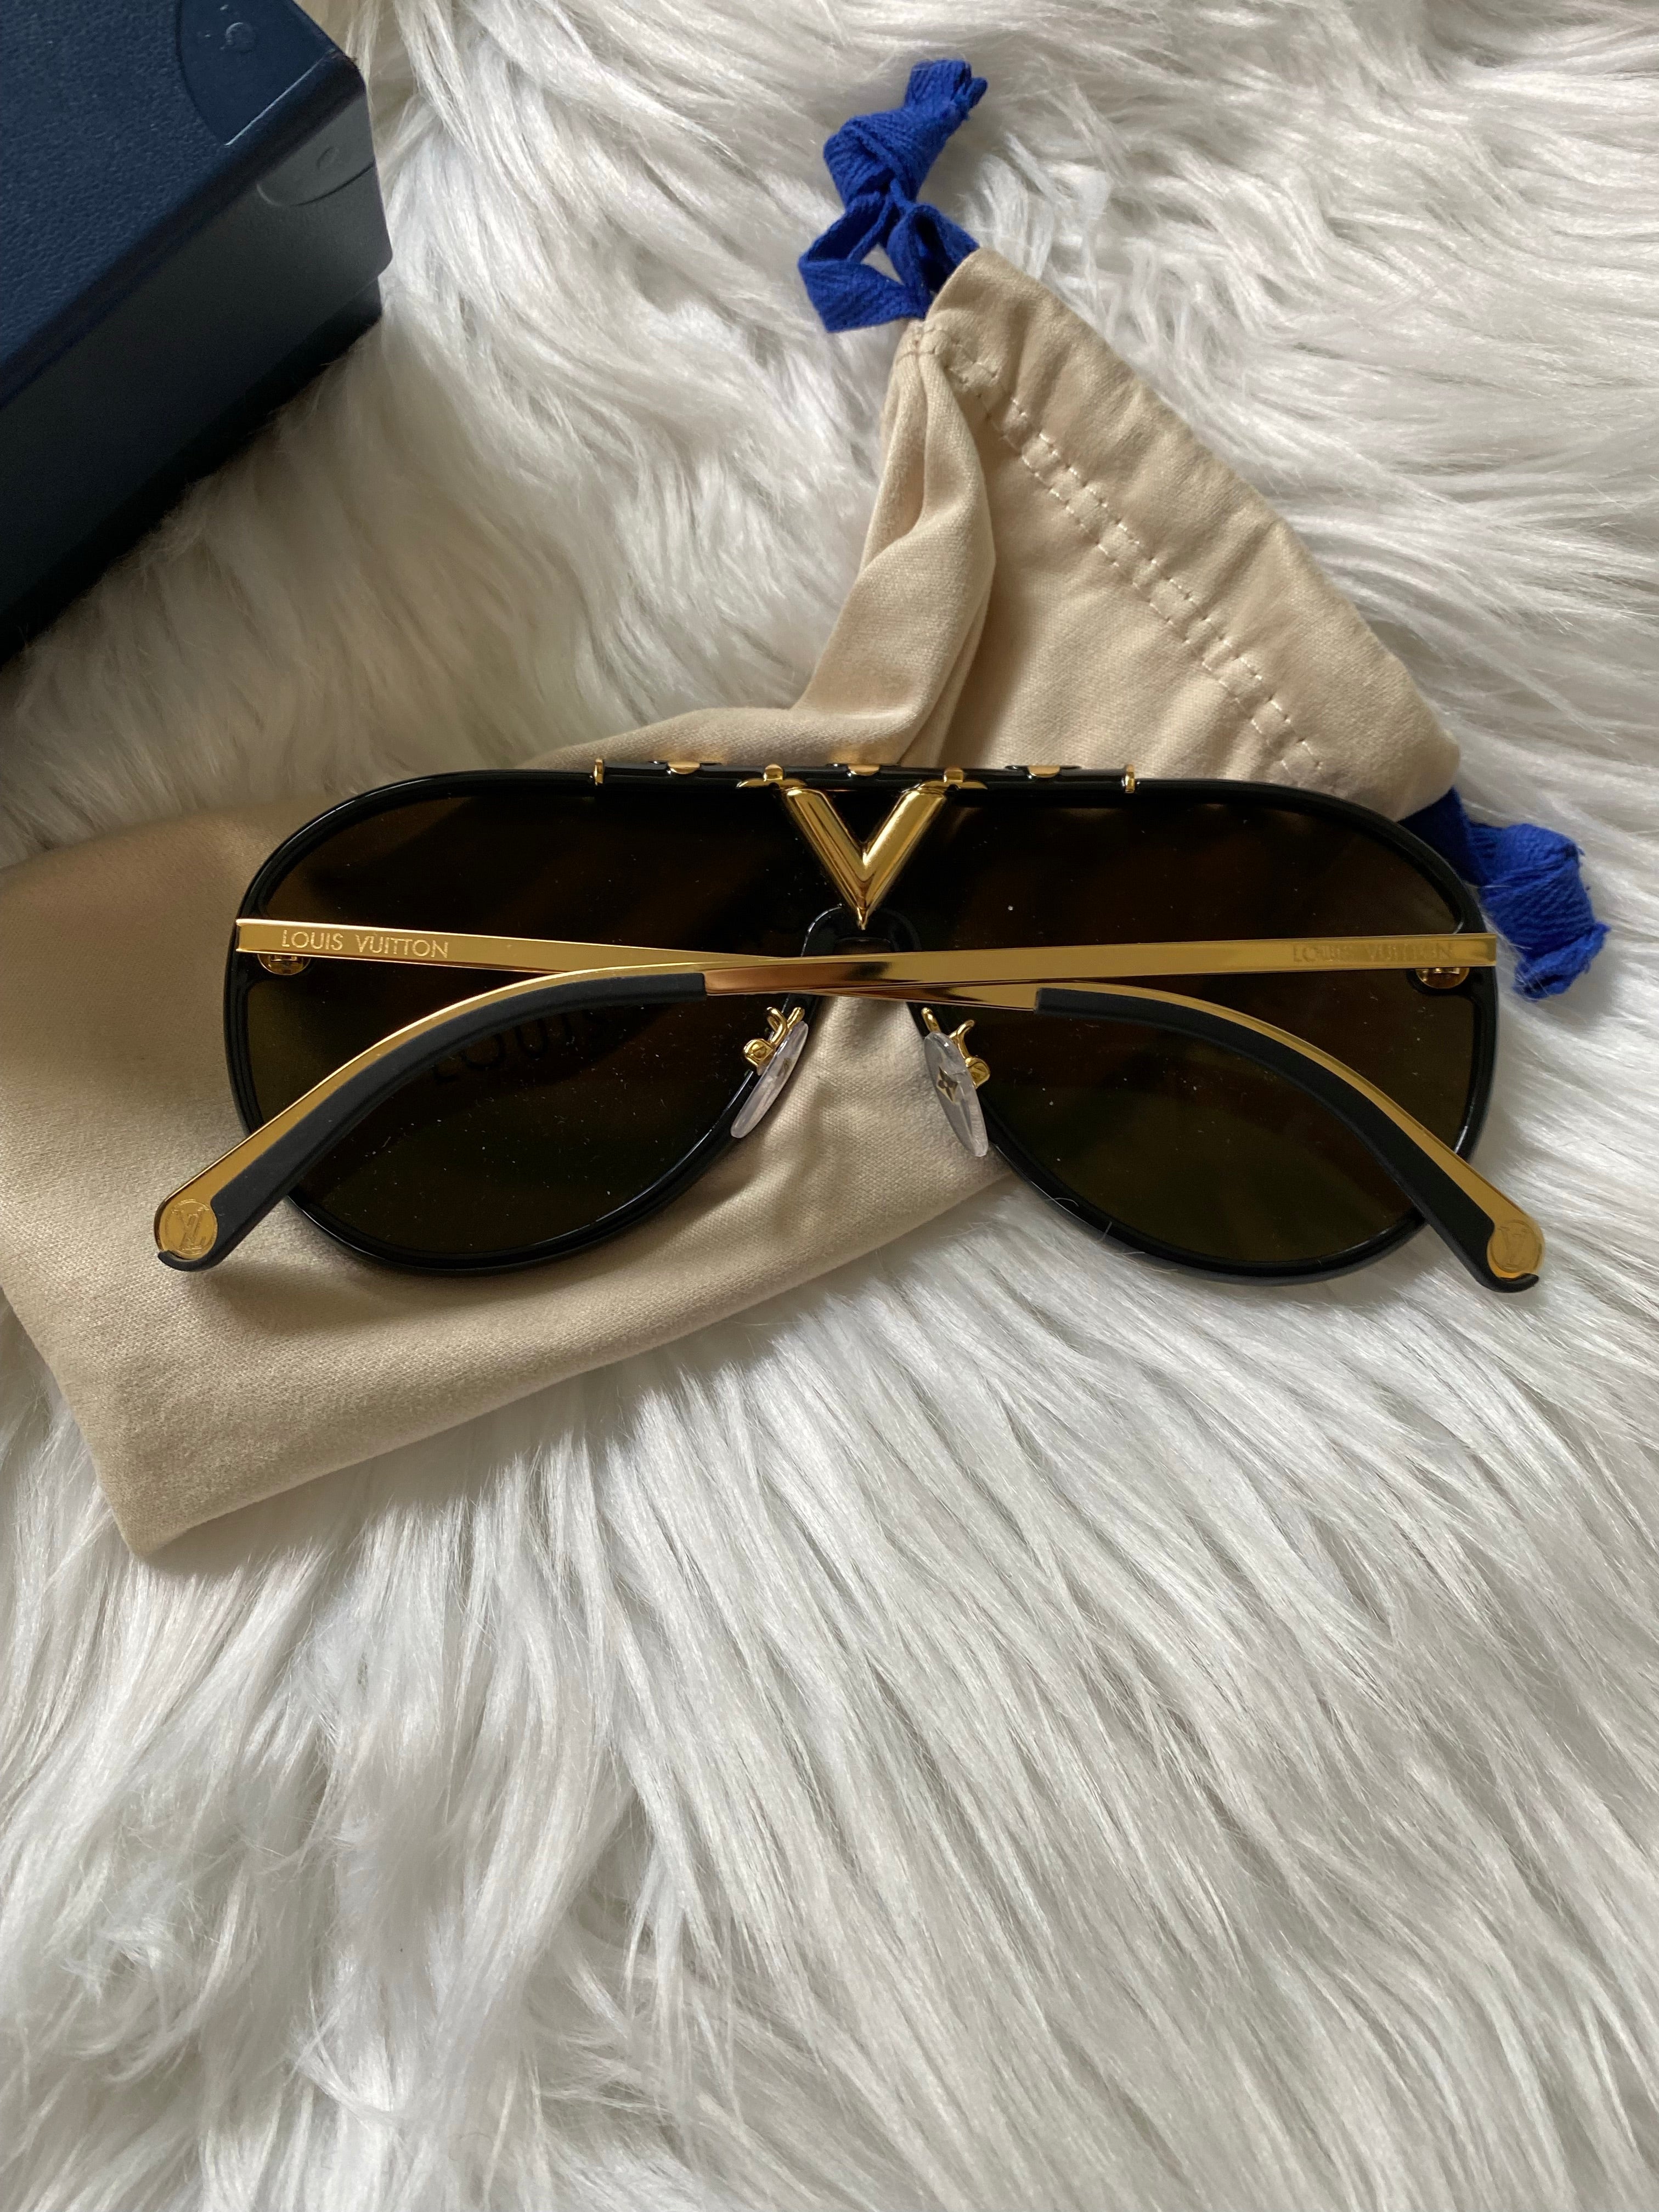 Compare prices for LV Drive Sunglasses (Z0896E) in official stores